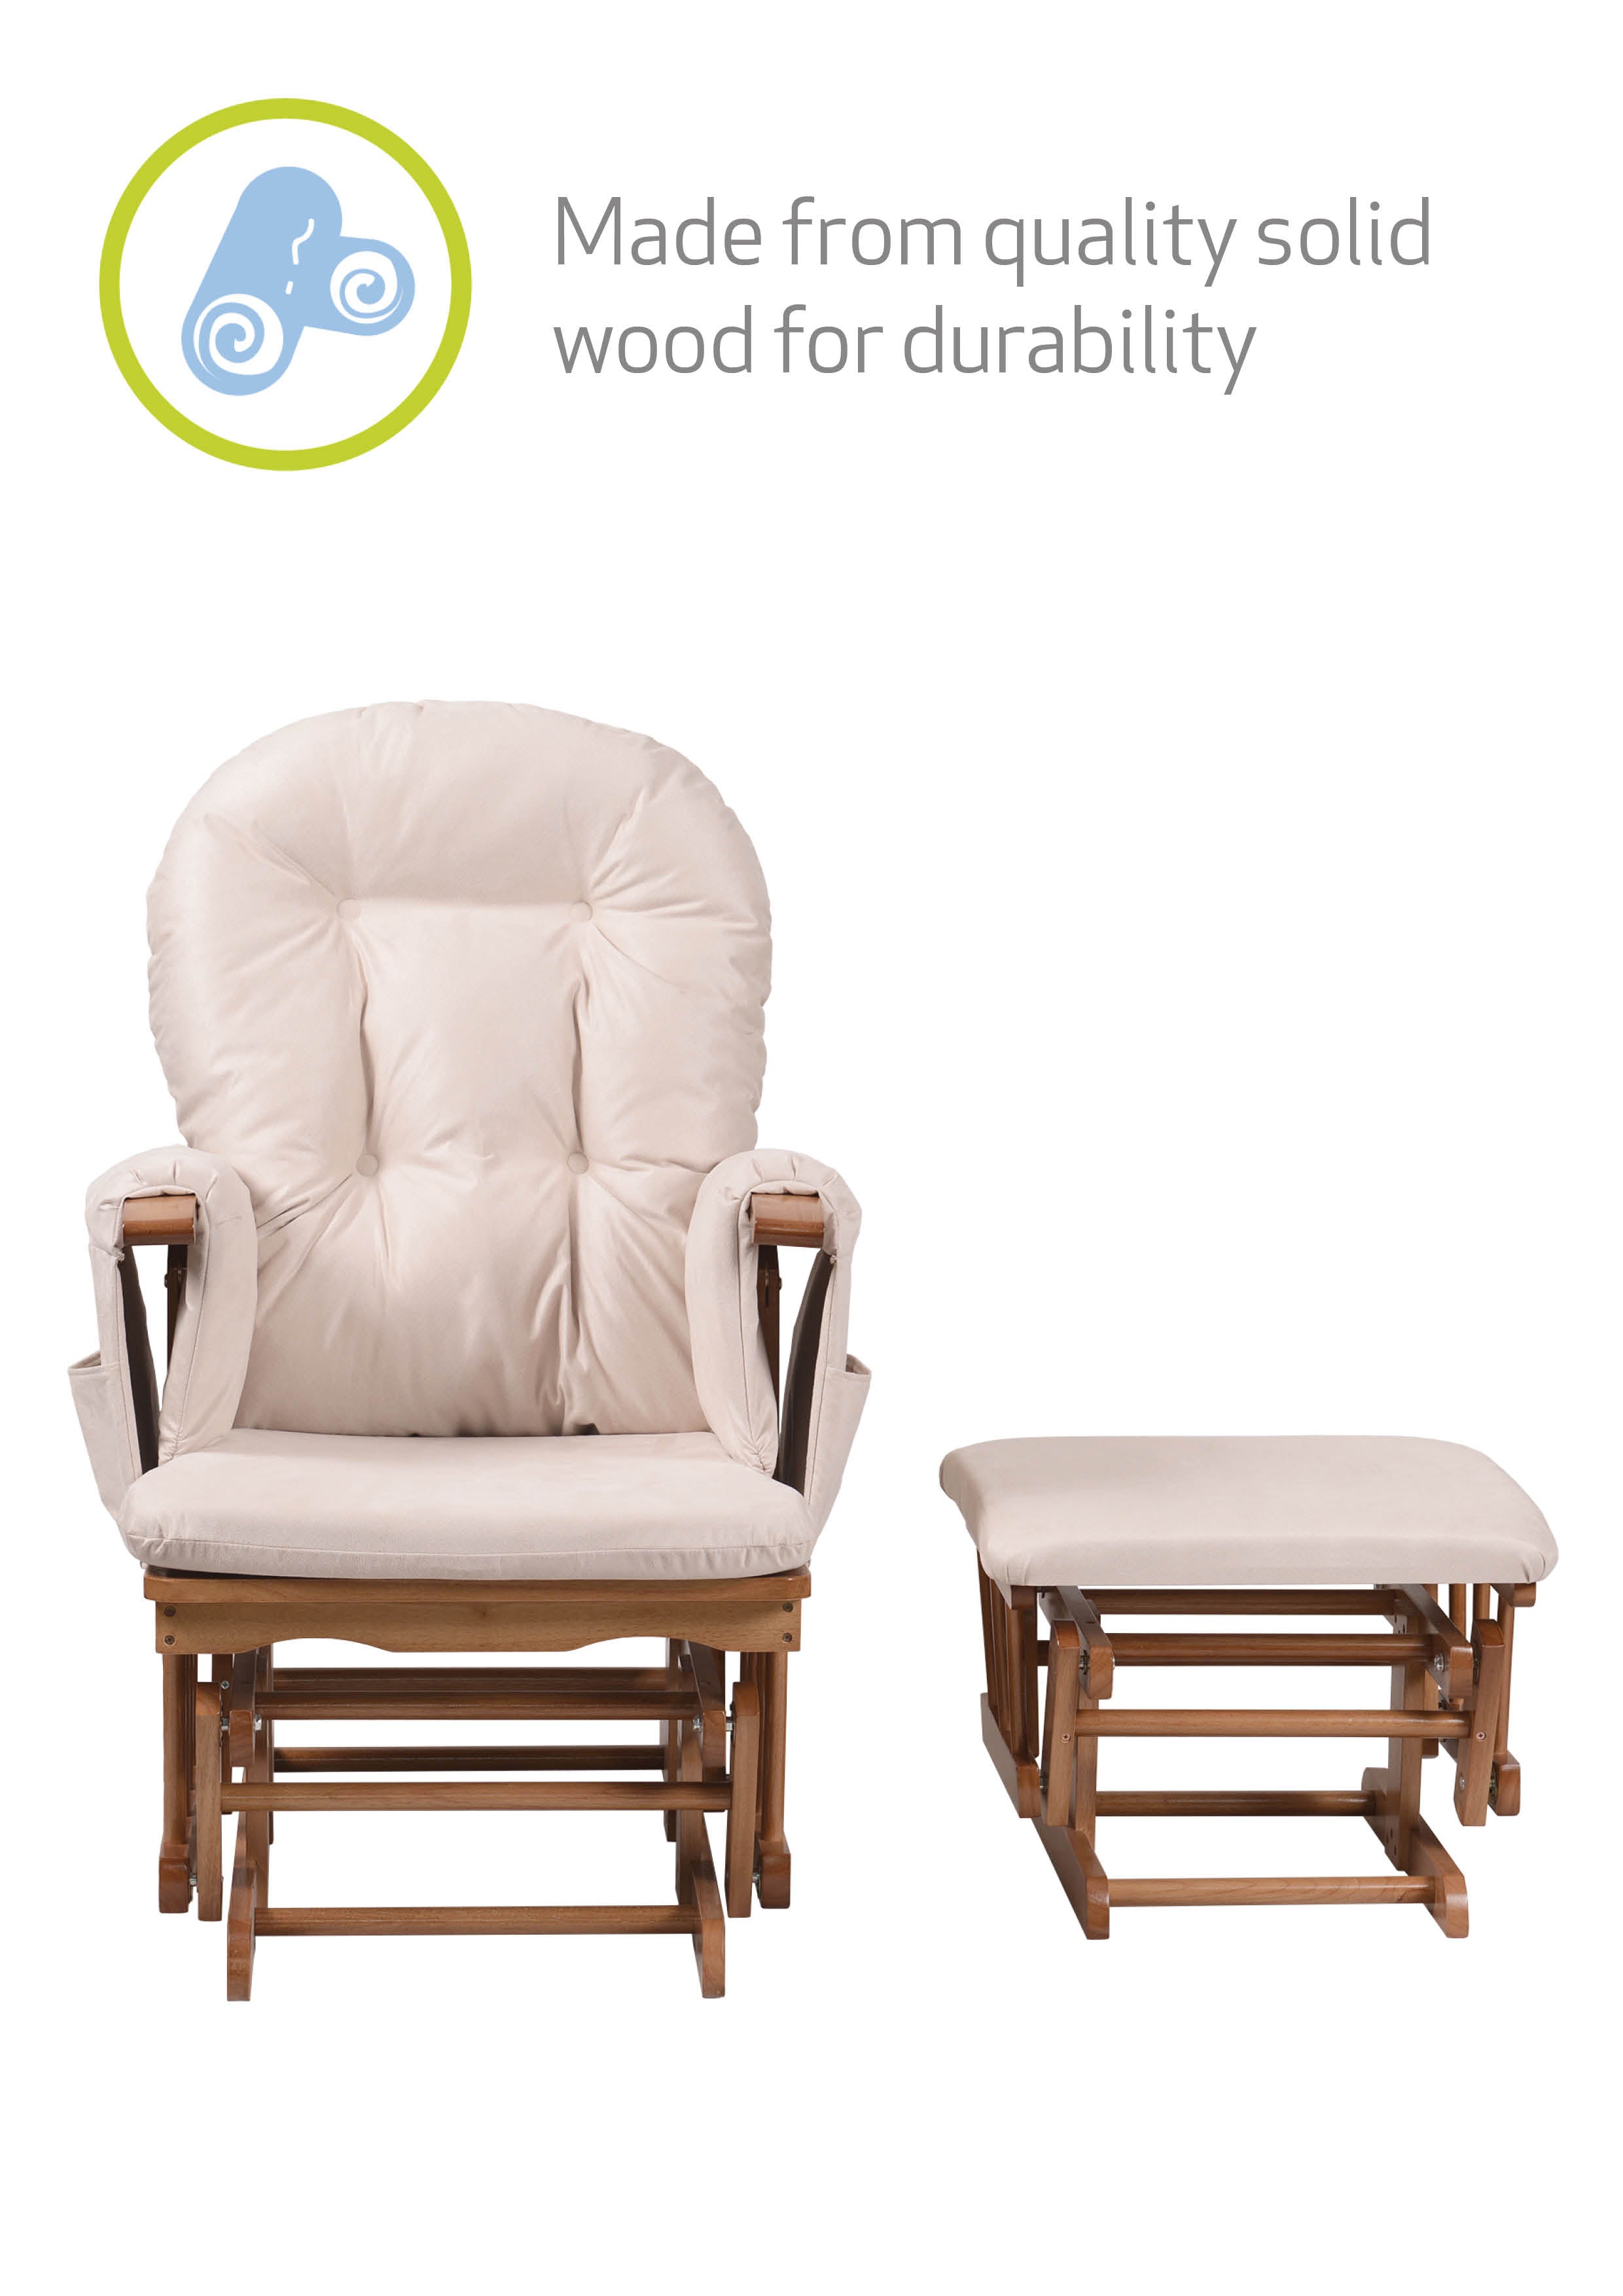 Haywood Reclining Nursing Chair and Footstool Dark - 15% OFF Applied at Checkout